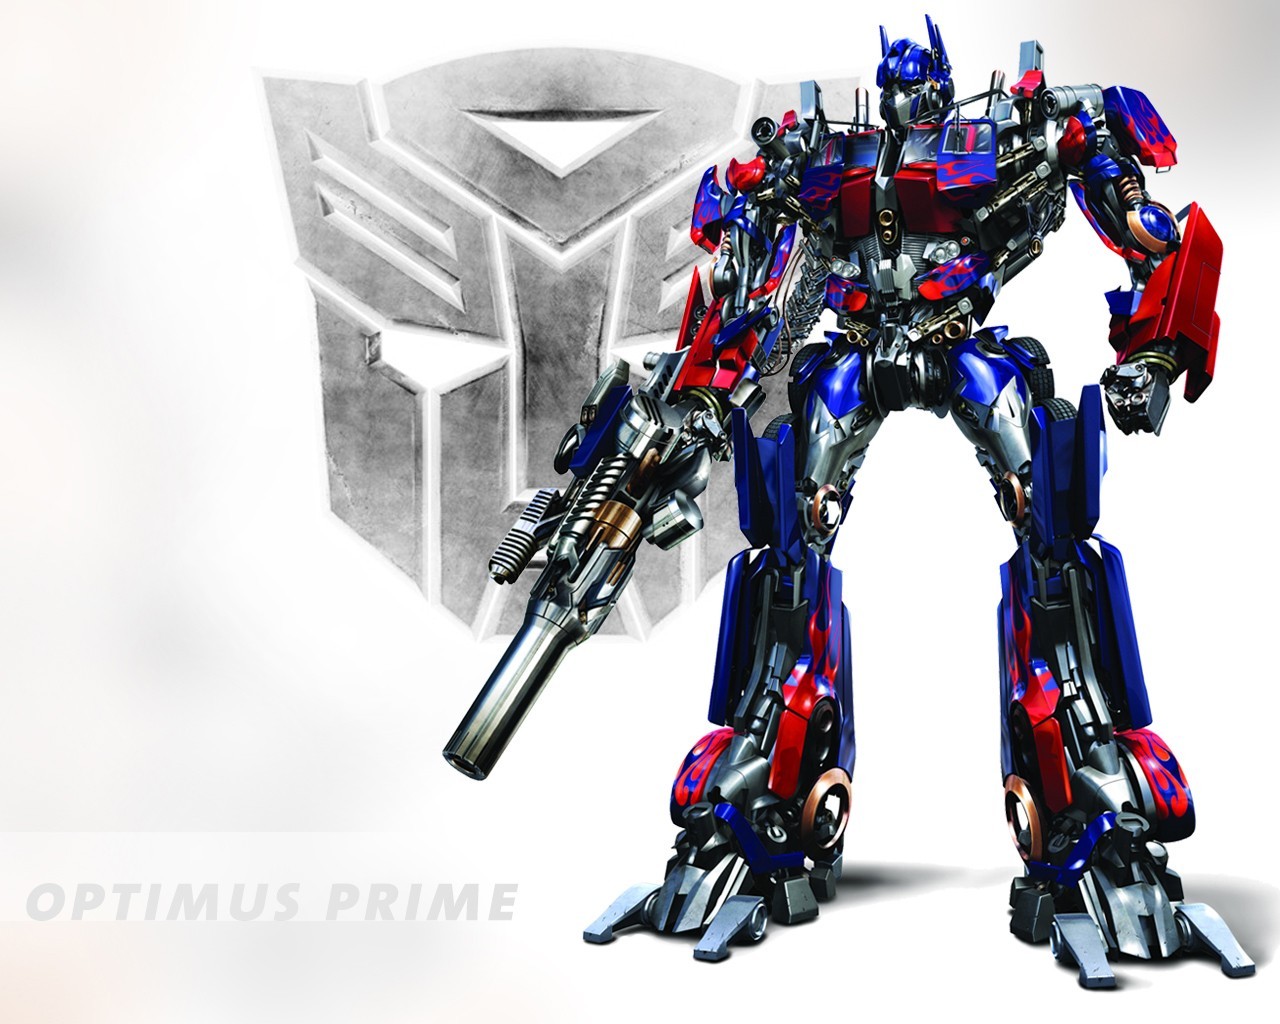 http://good-wallpapers.com/pictures/428/transformers-optimus-prime-theme-682.jpg